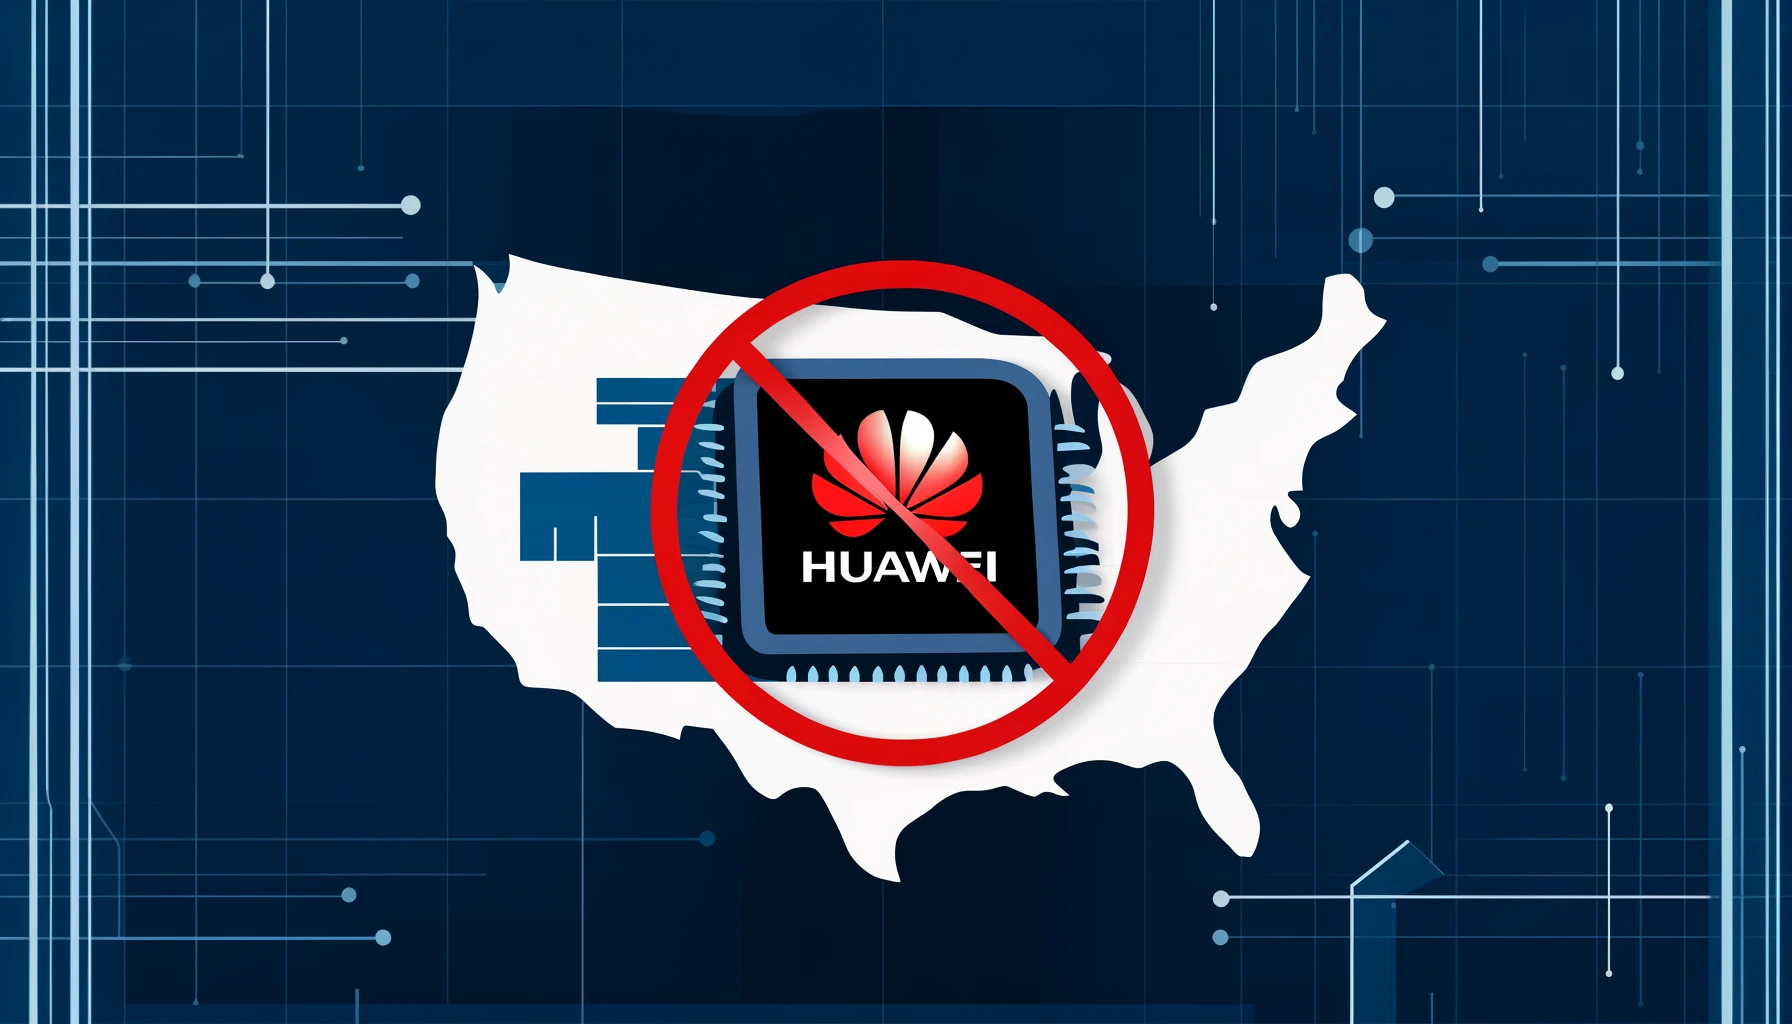 U.S. withdraws certain export permits for chip sales to Huawei, aiming to limit China's technological influence.